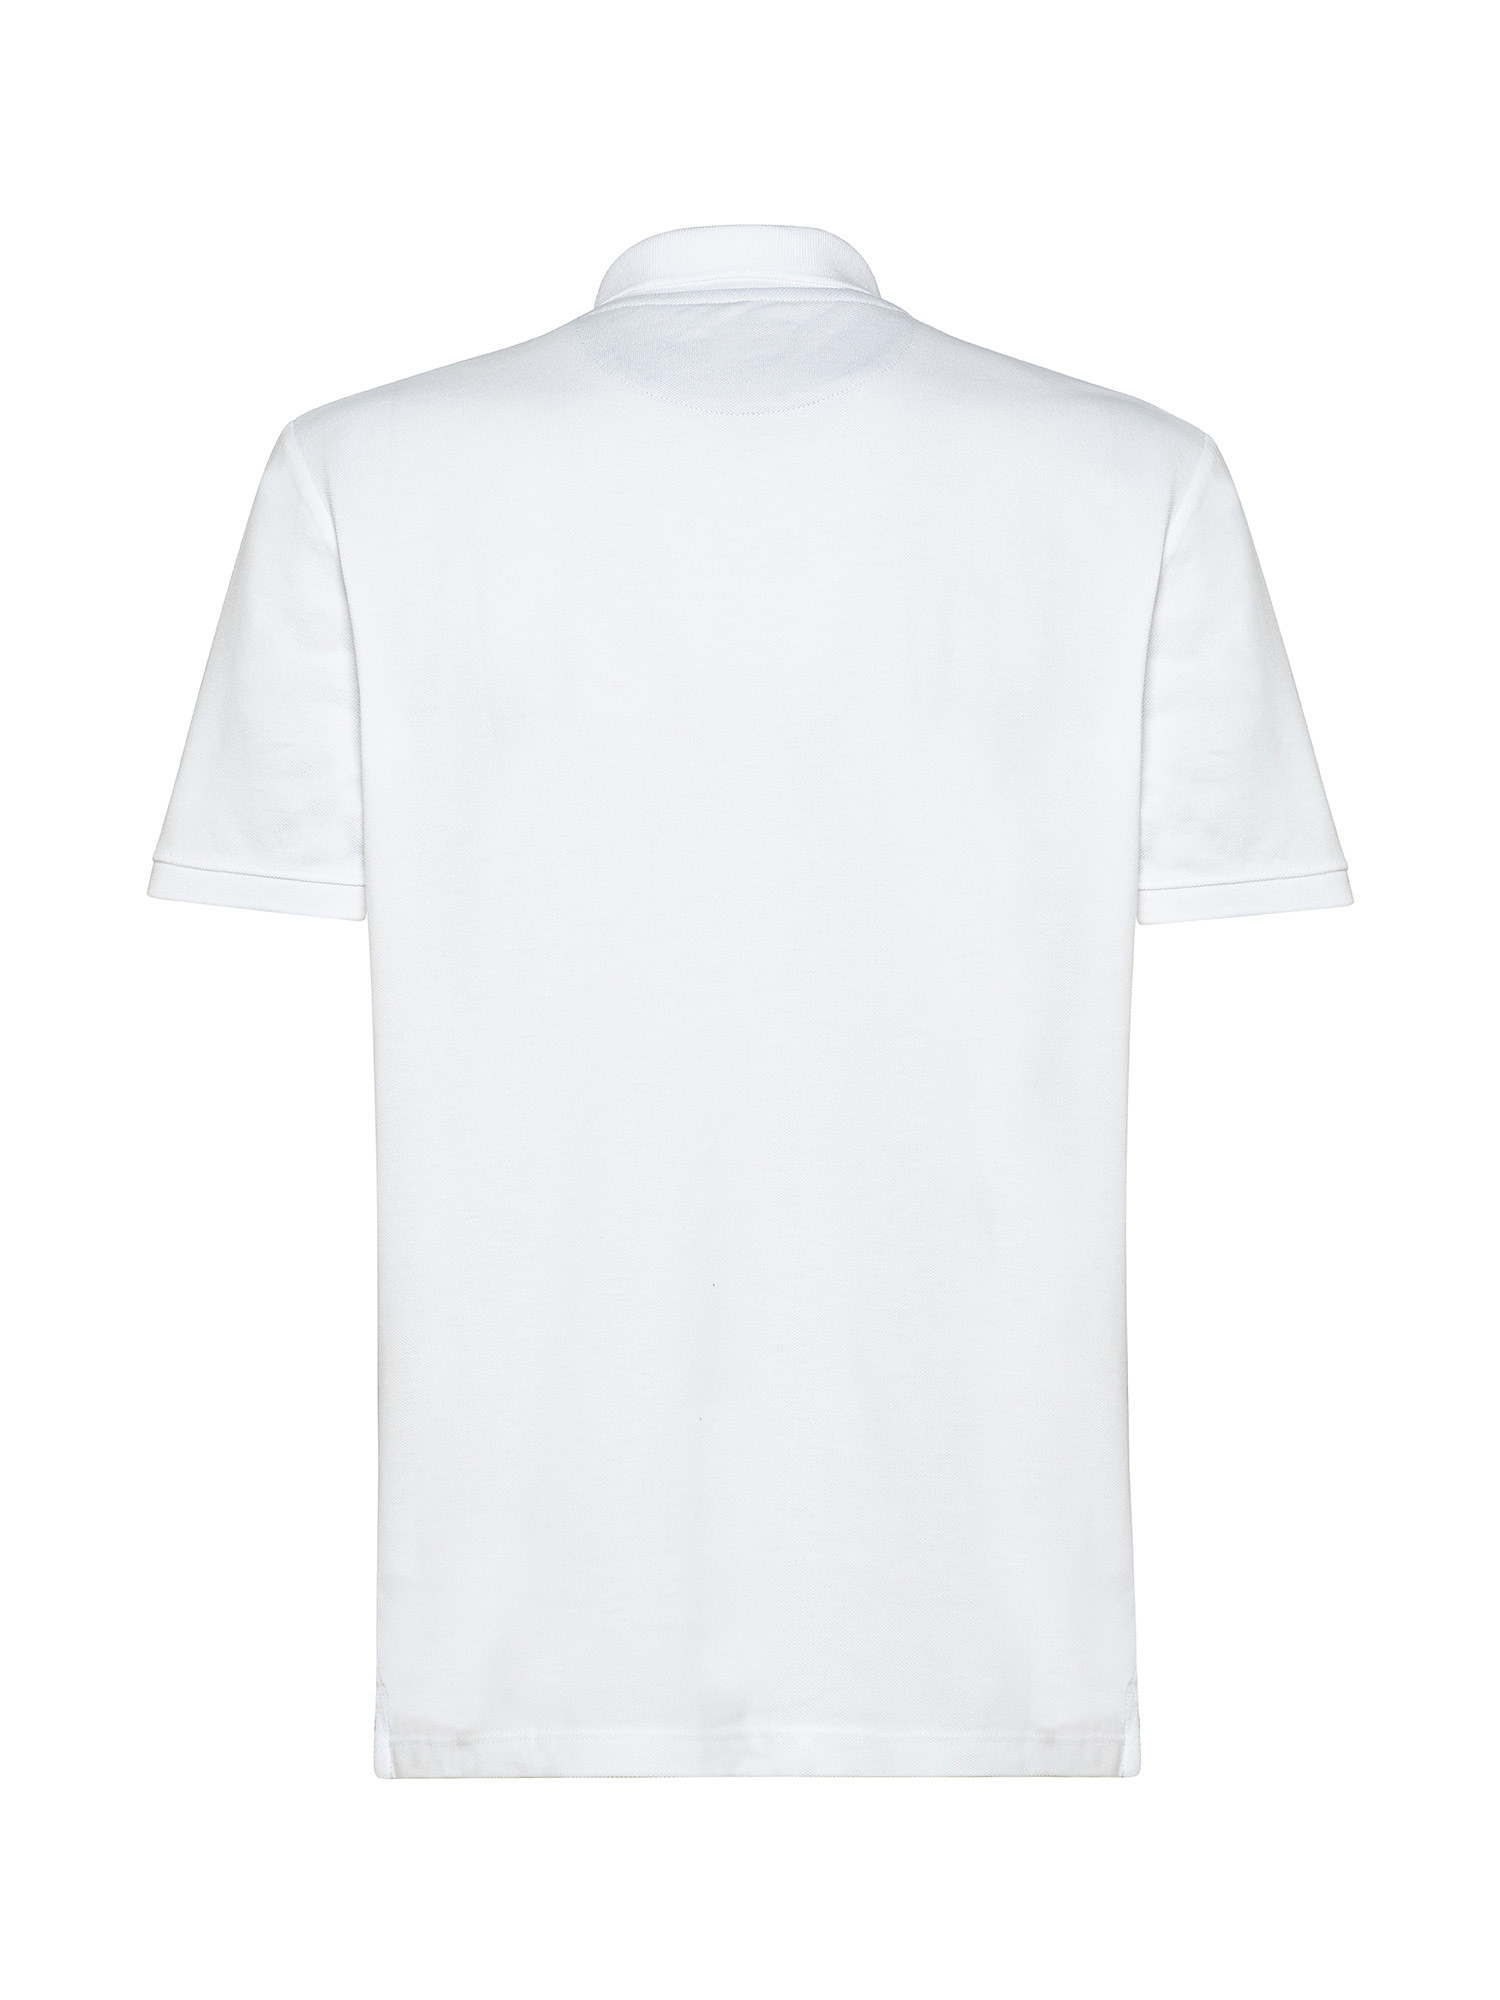 Men's Millers River Piqué Polo Shirt, White, large image number 1